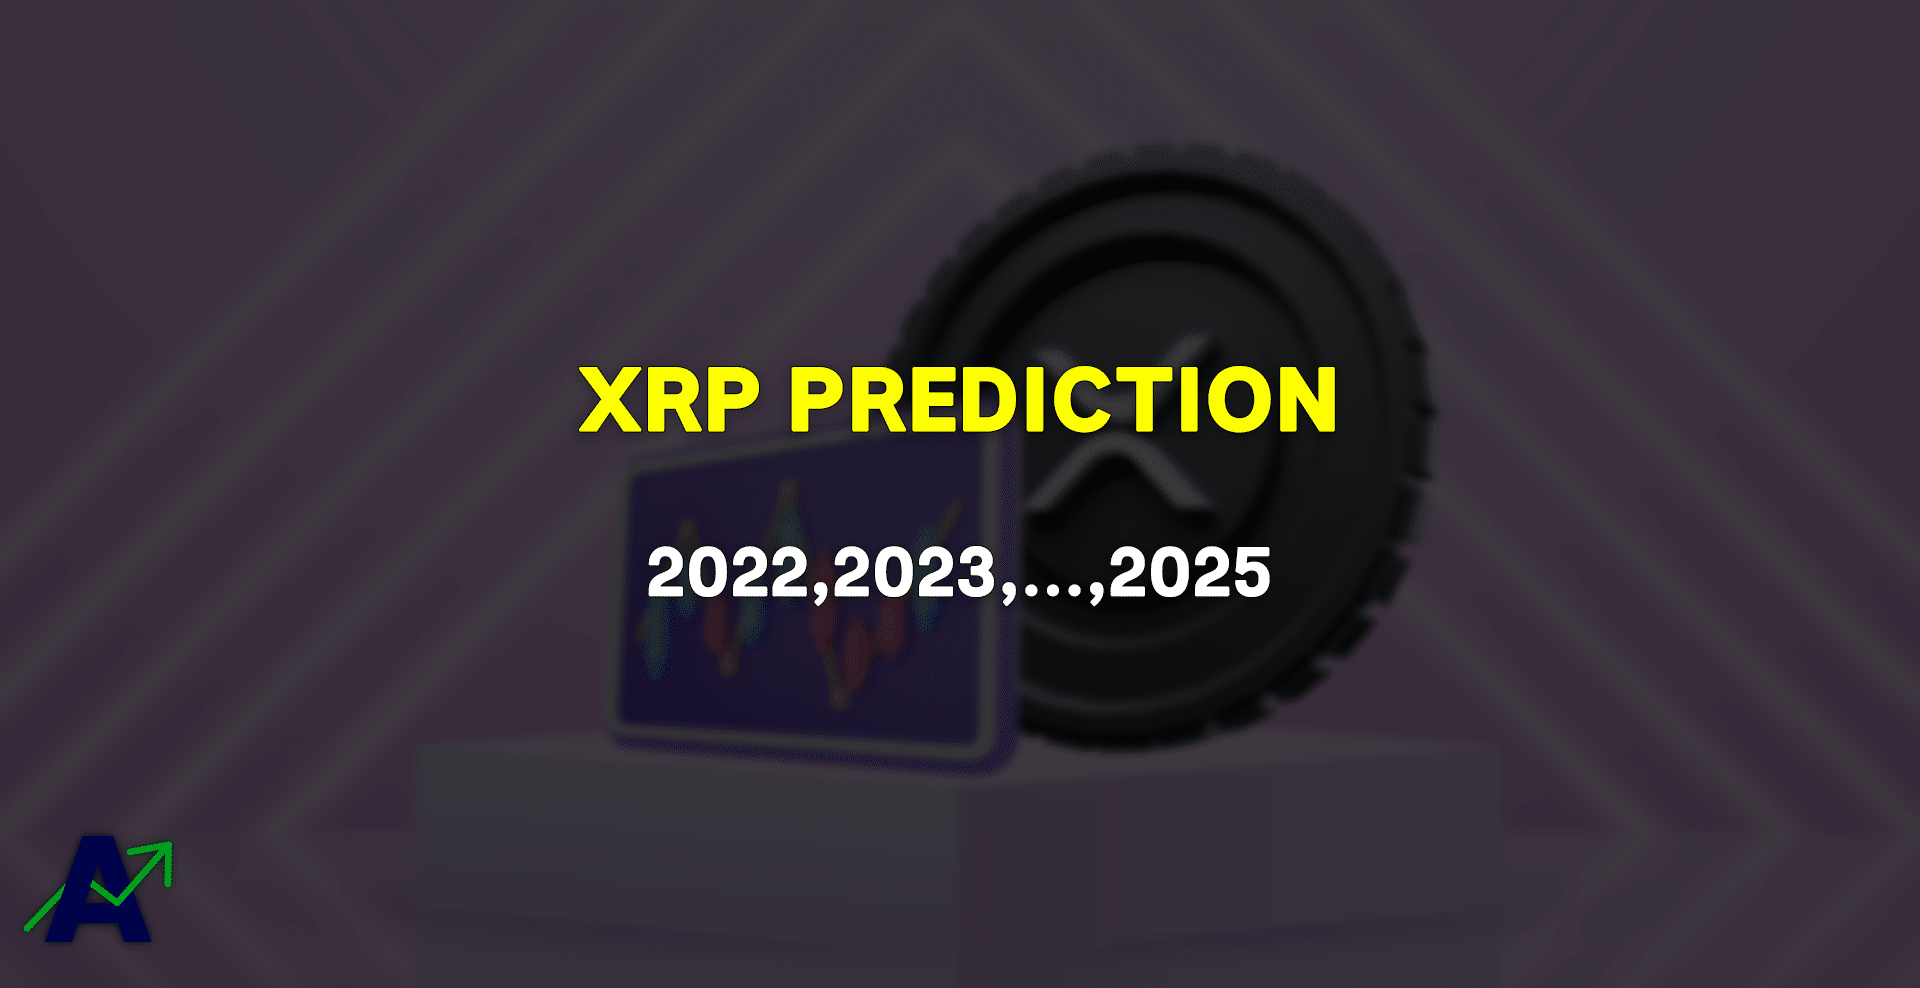 XRP Price forecast for 2022, 2023, 2024 & 2025